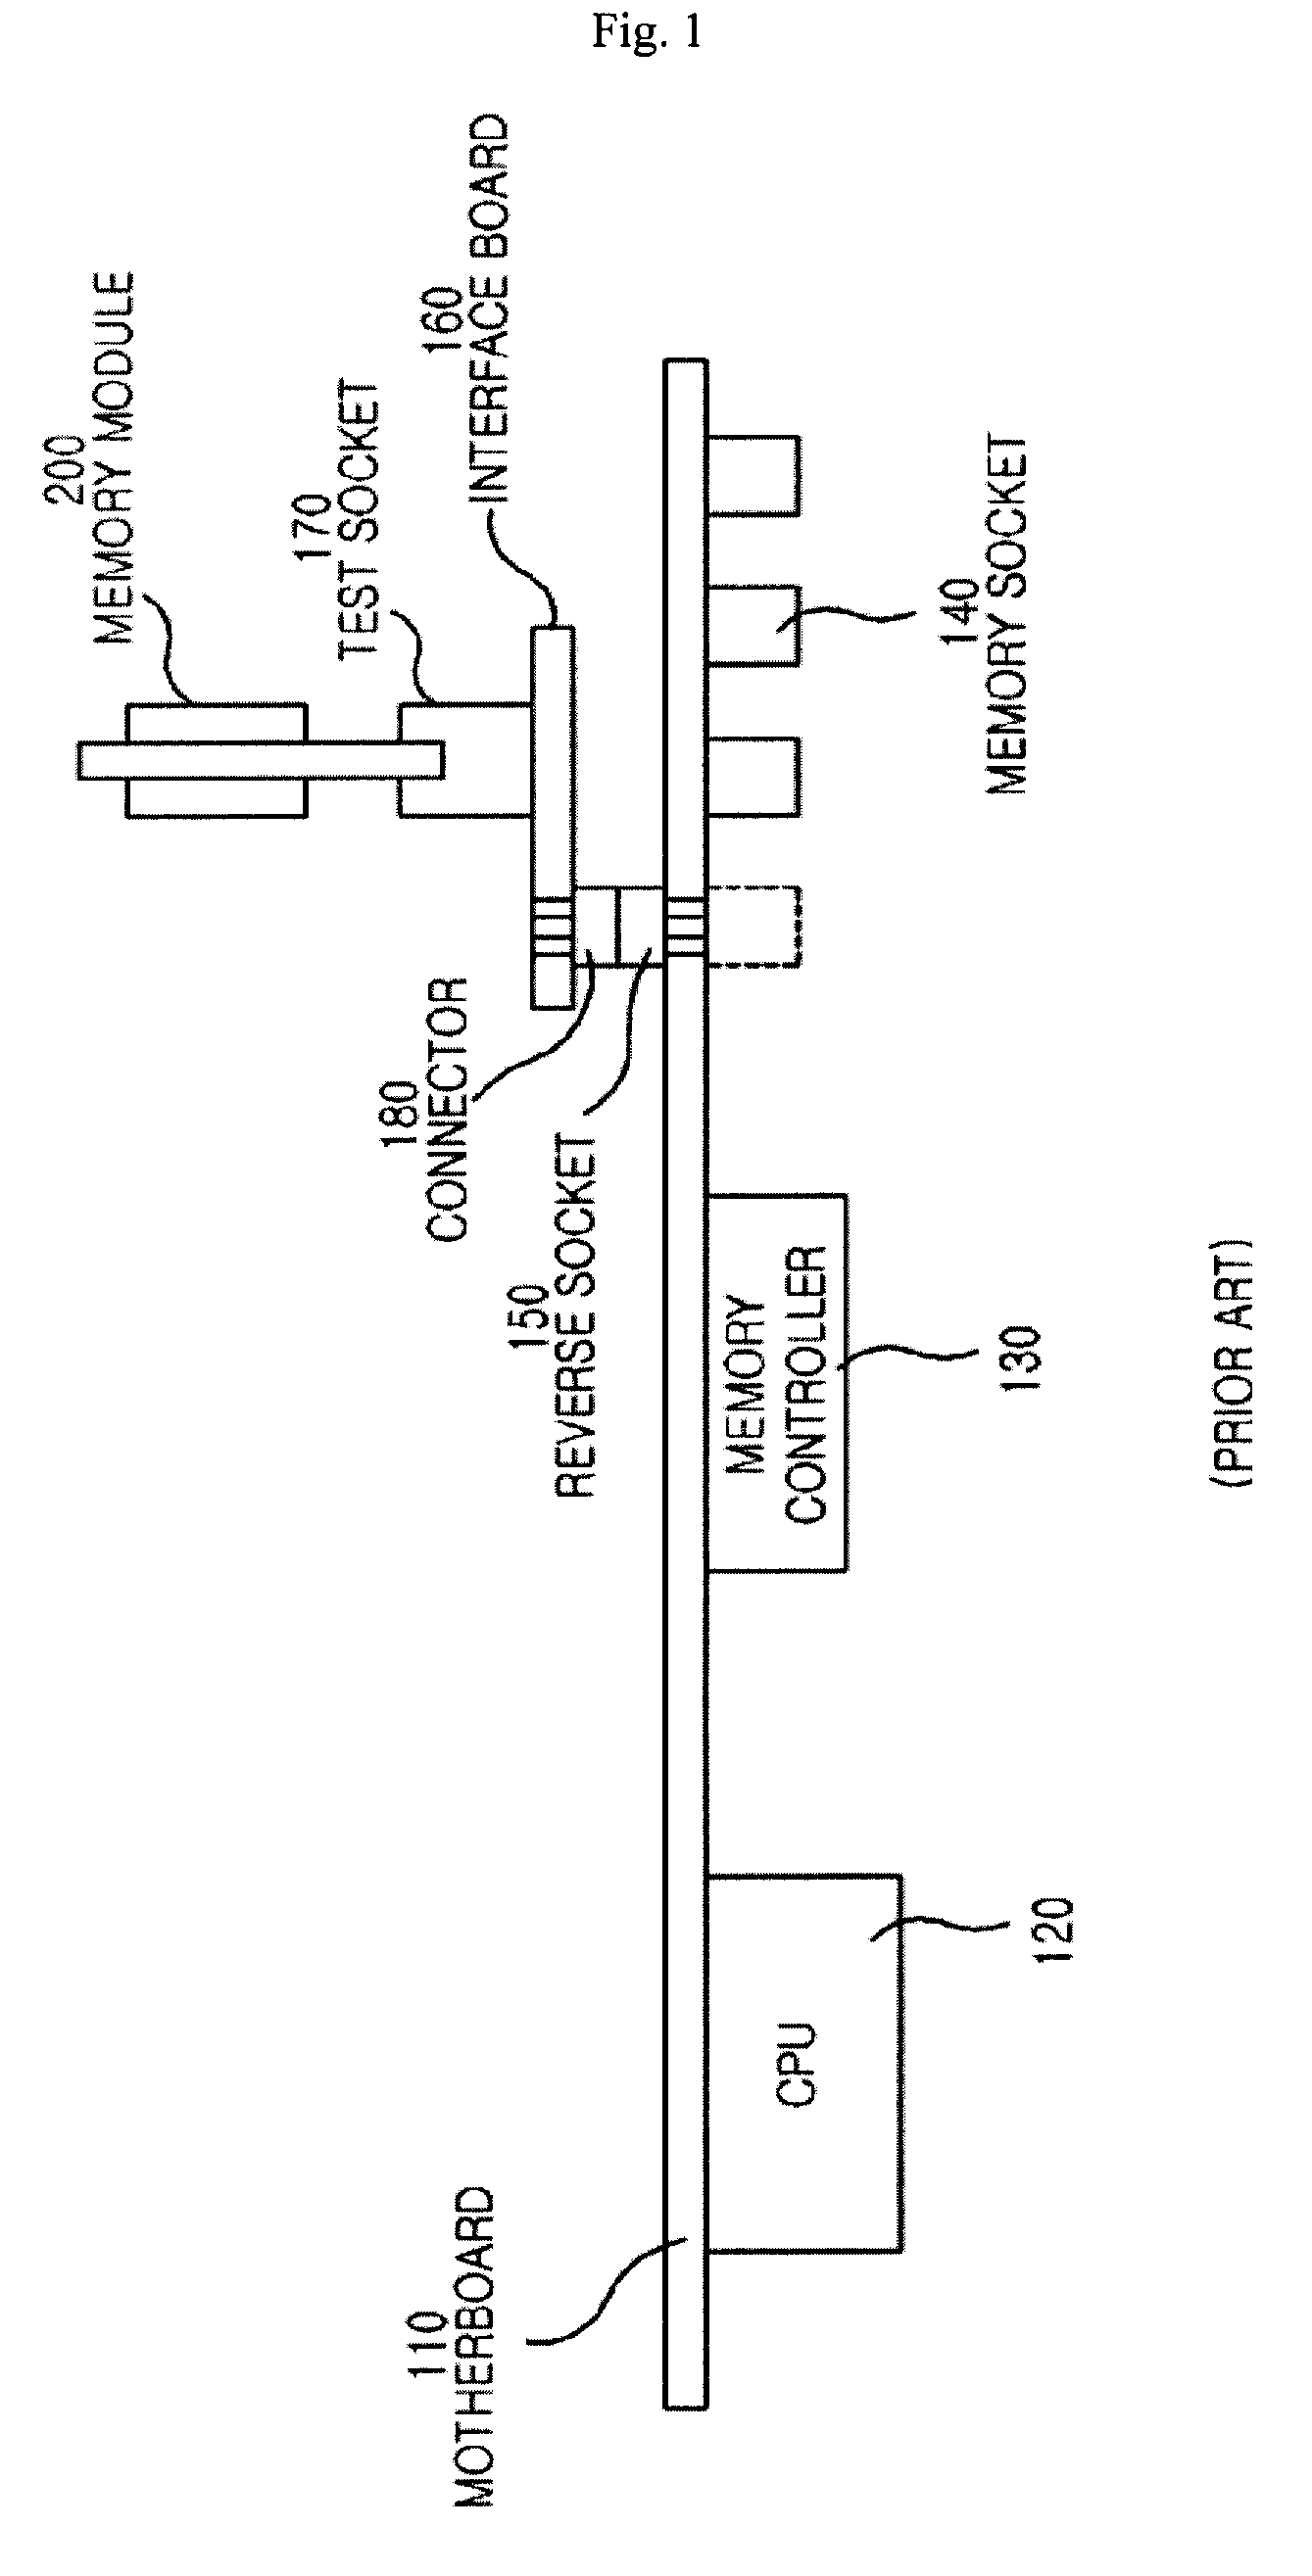 Memory application tester having vertically-mounted motherboard